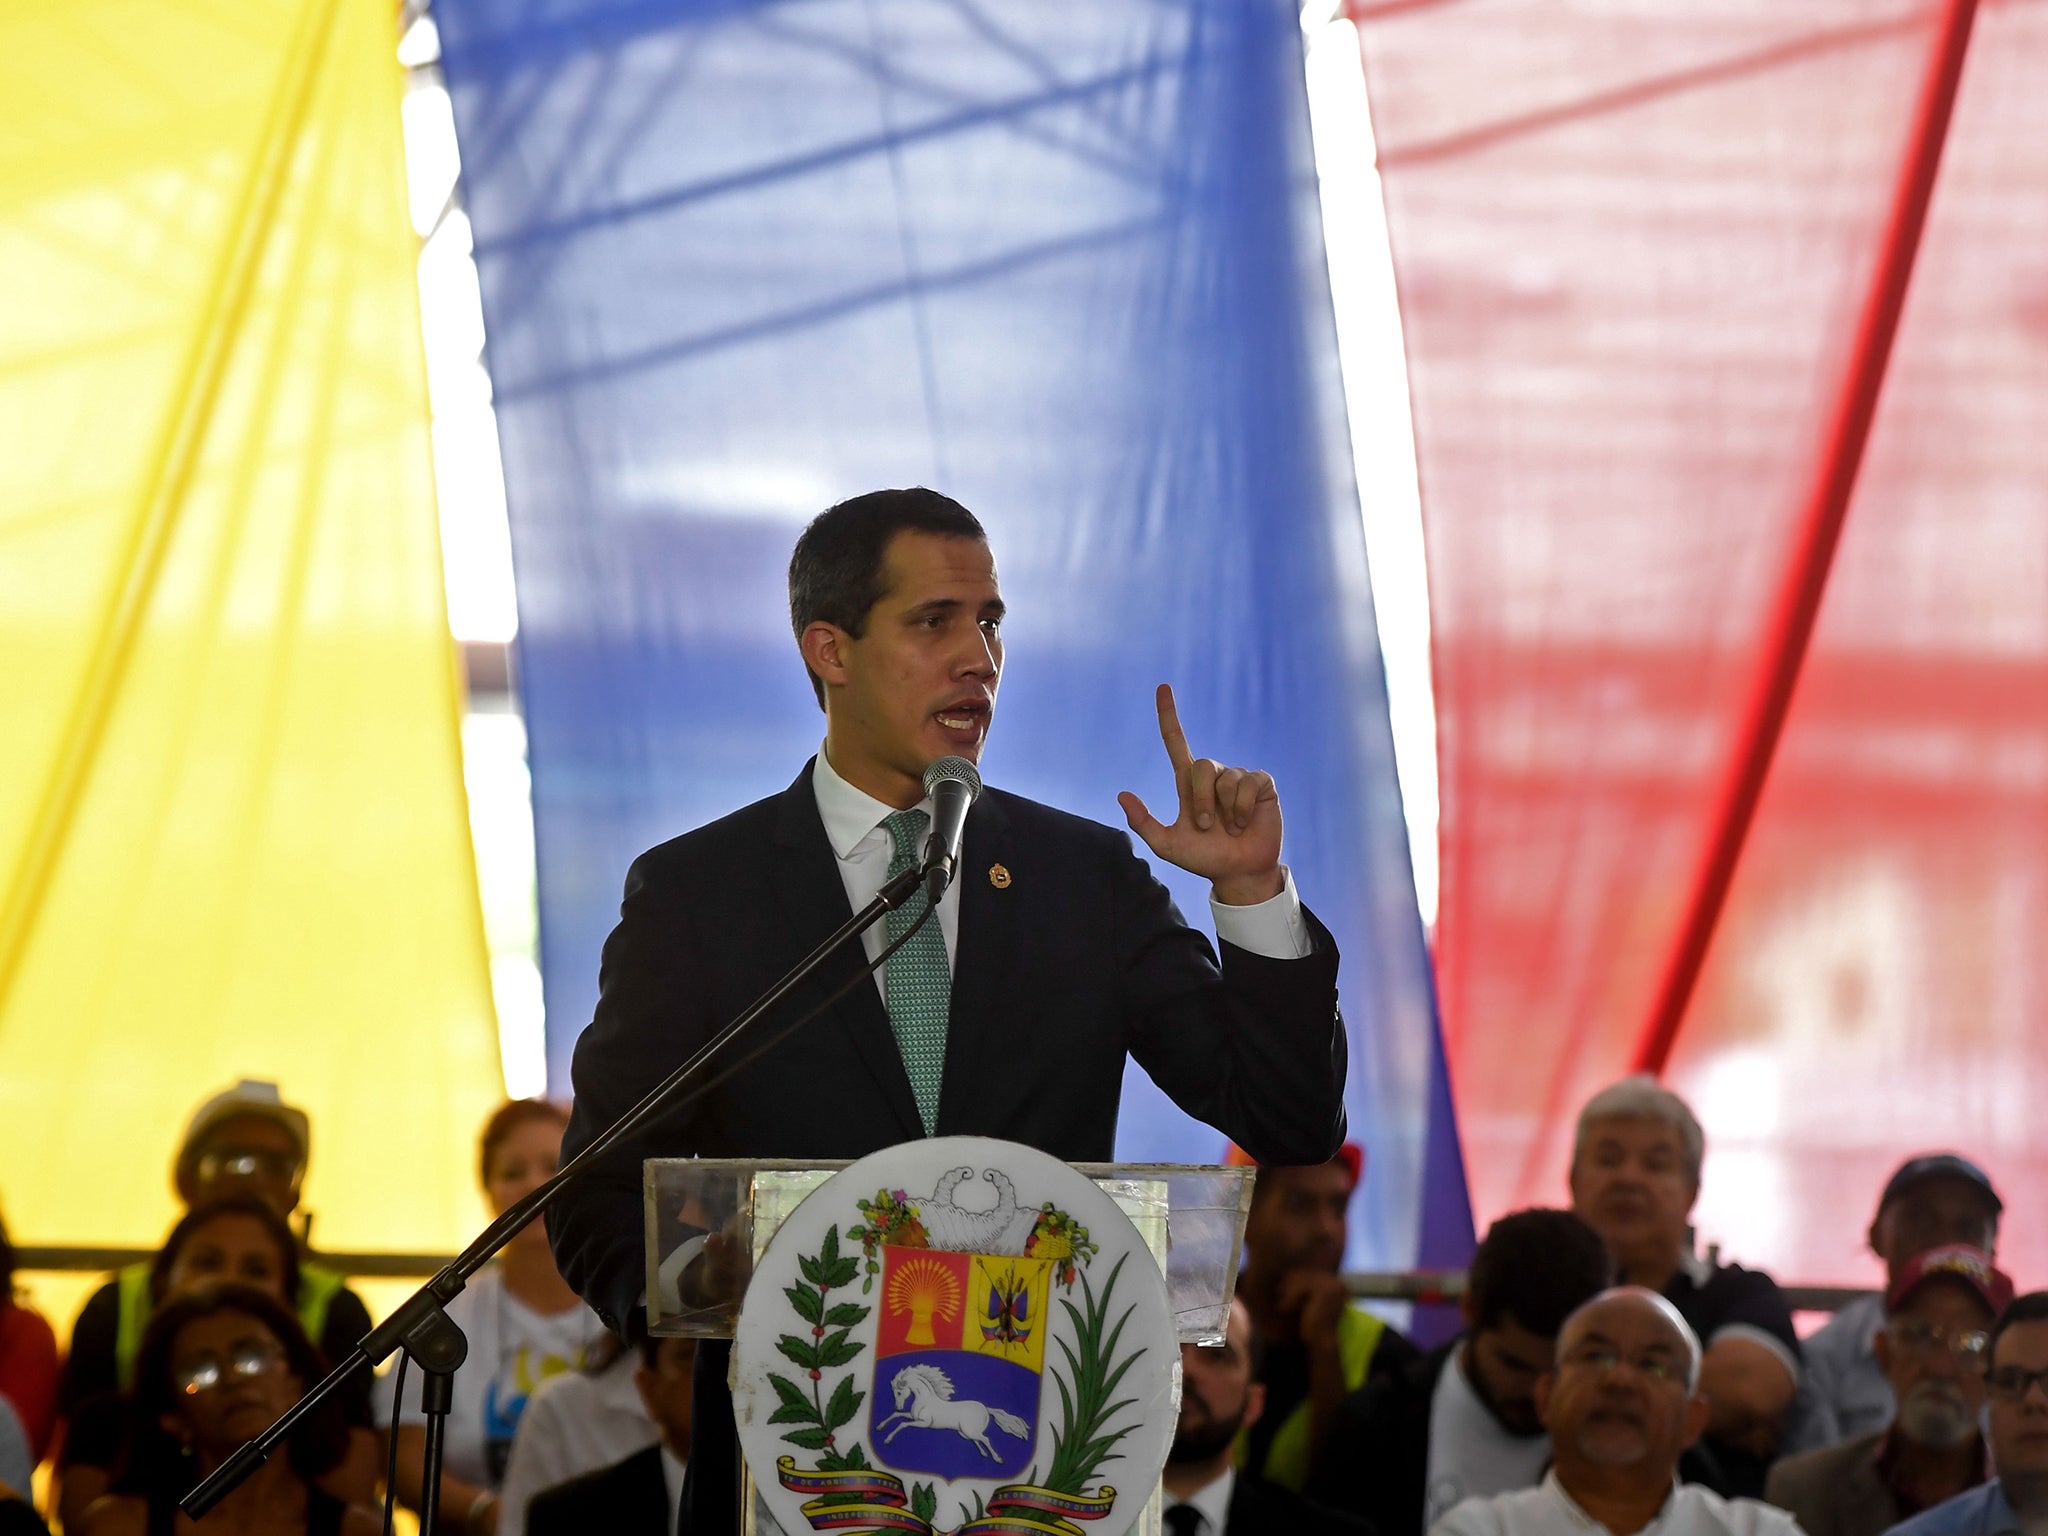 Mr Guaido has been one of the only obstacles for Mr Maduro claiming total authority